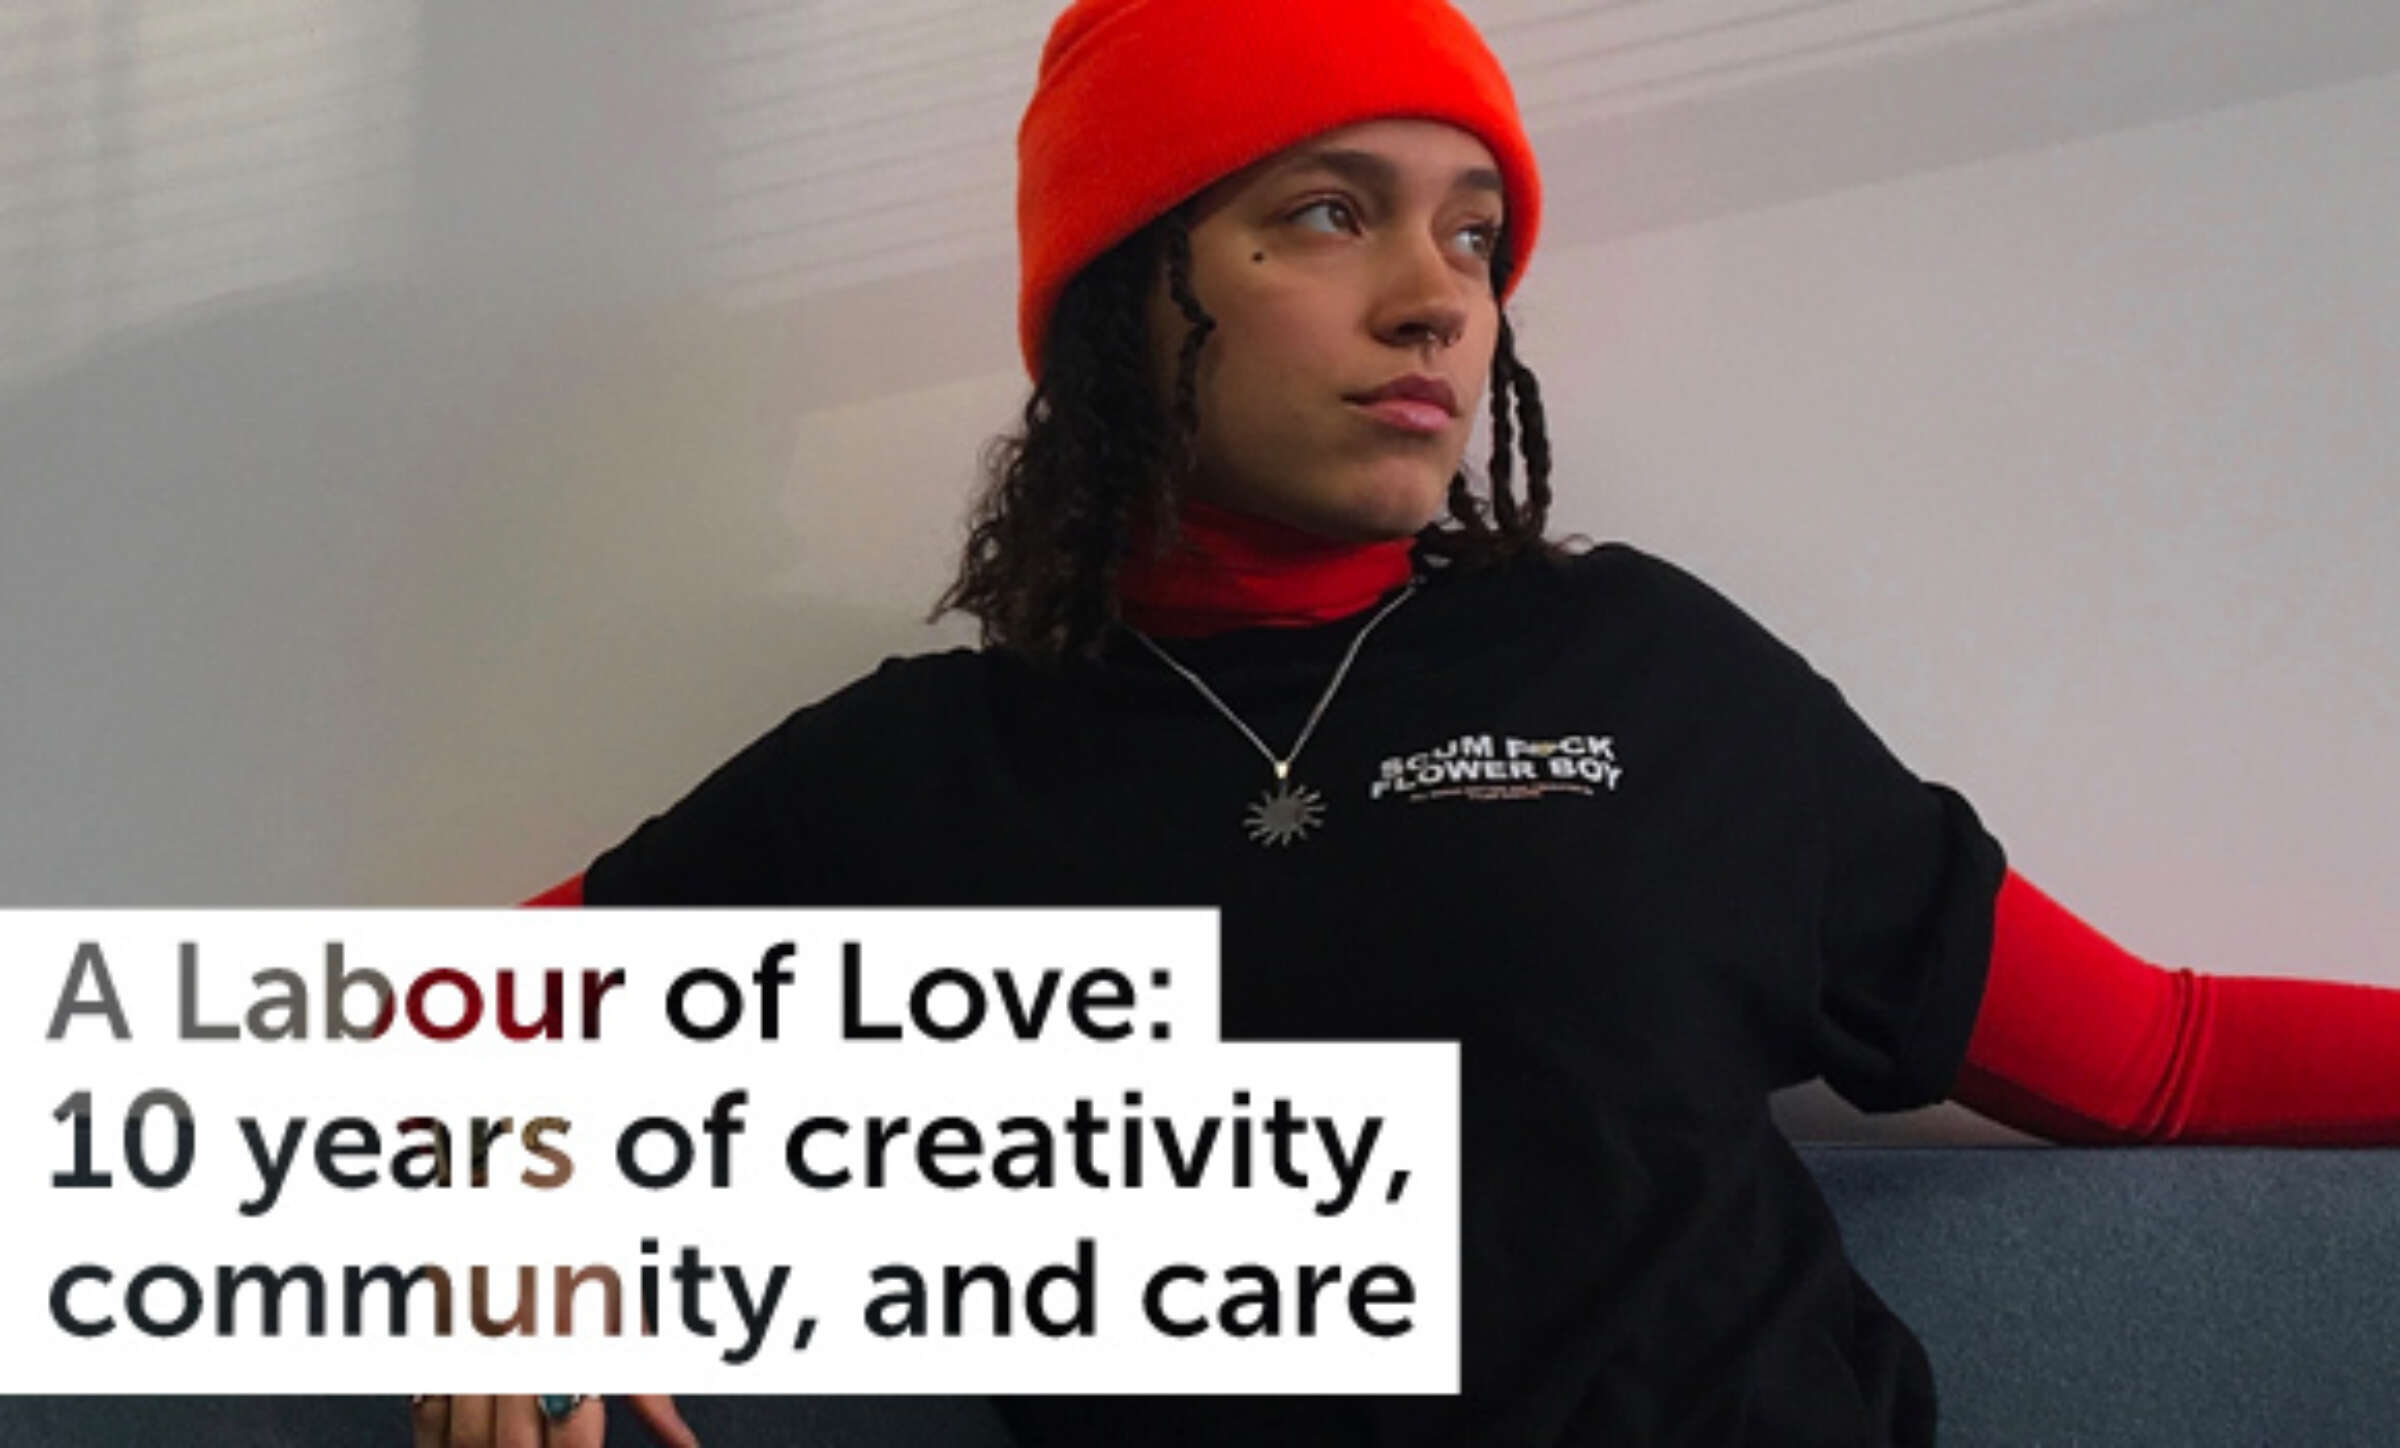 Person wearing an orange beanie, red long-sleeve shirt, and black t-shirt with a graphic design, sitting on a couch and looking to the side. Text overlay reads: "A Labour of Love: 10 years of creativity, community, and care.